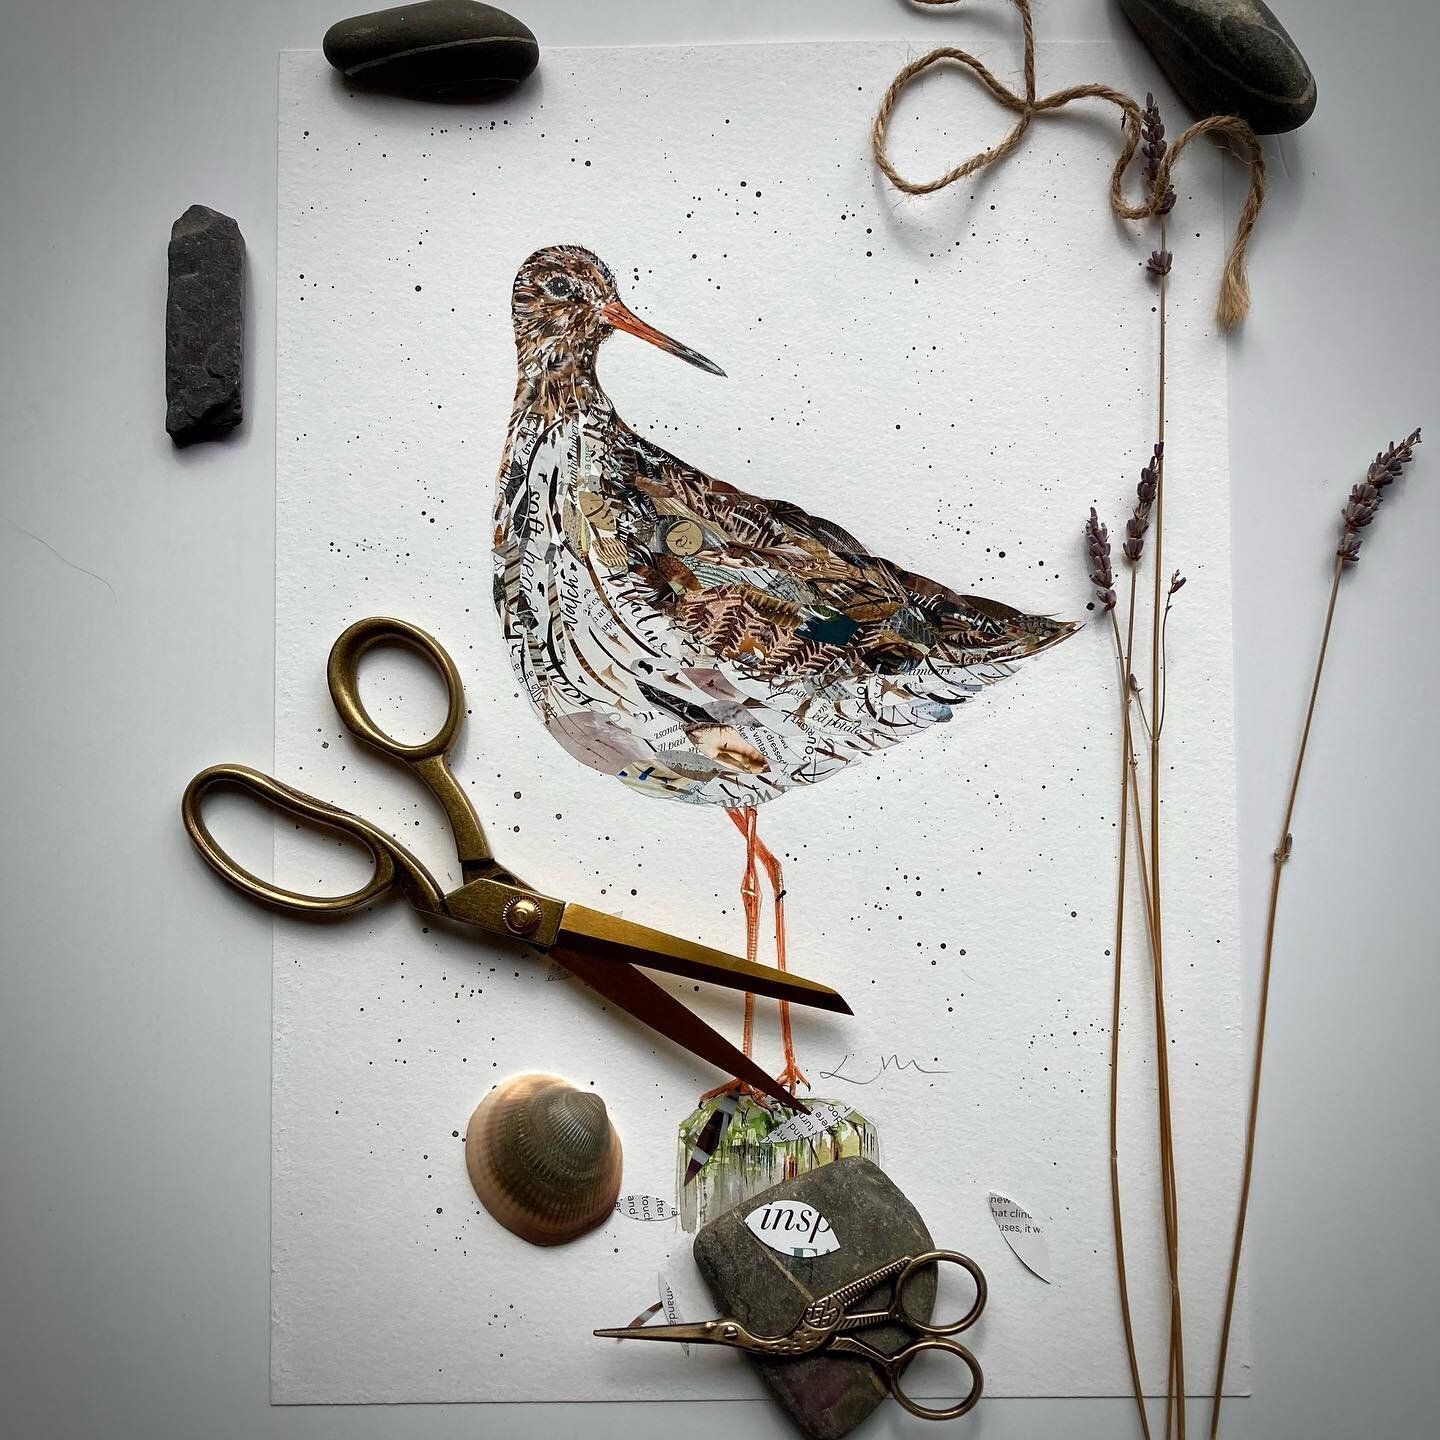 Back to a bit of cutting and sticking 😉 #shedonthefell #waderbirds #redshank #collageart #collagefeathers #birdcollages #britishwildlifeartist #lancashireartists #ribblevalleylife #laurabrownartist